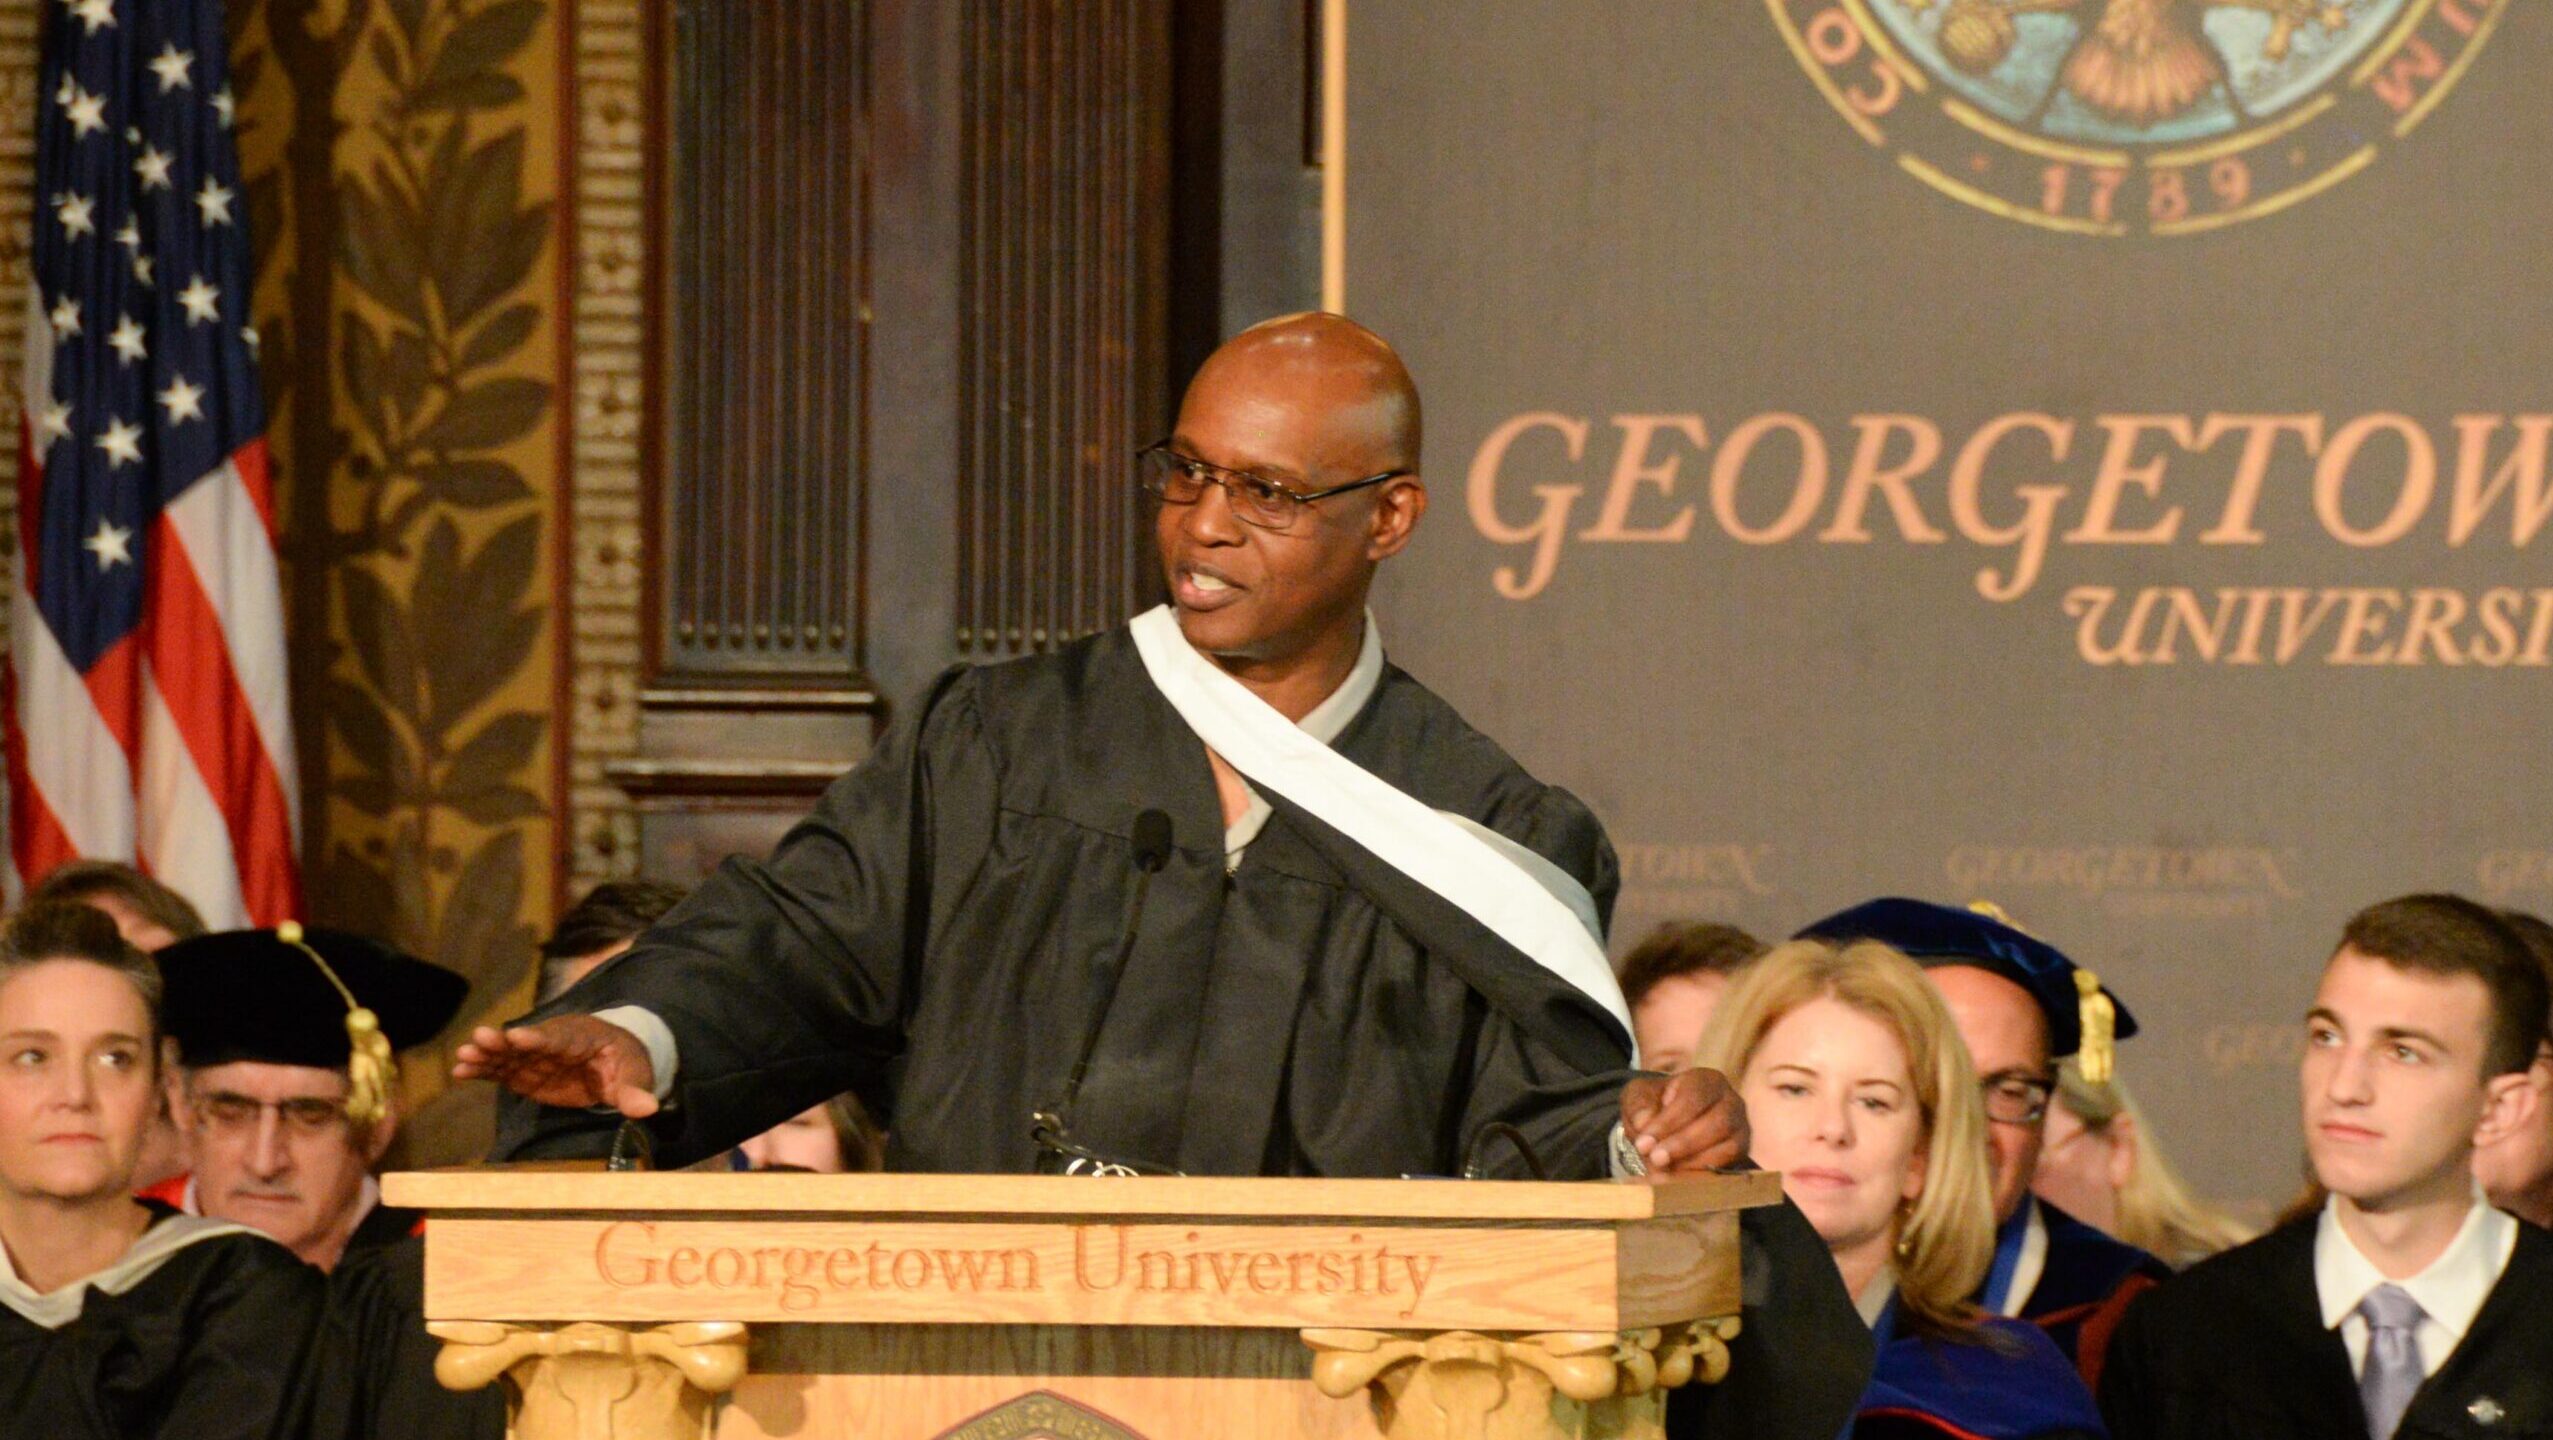 A bespectacled man in academic regalia speaks at a podium.